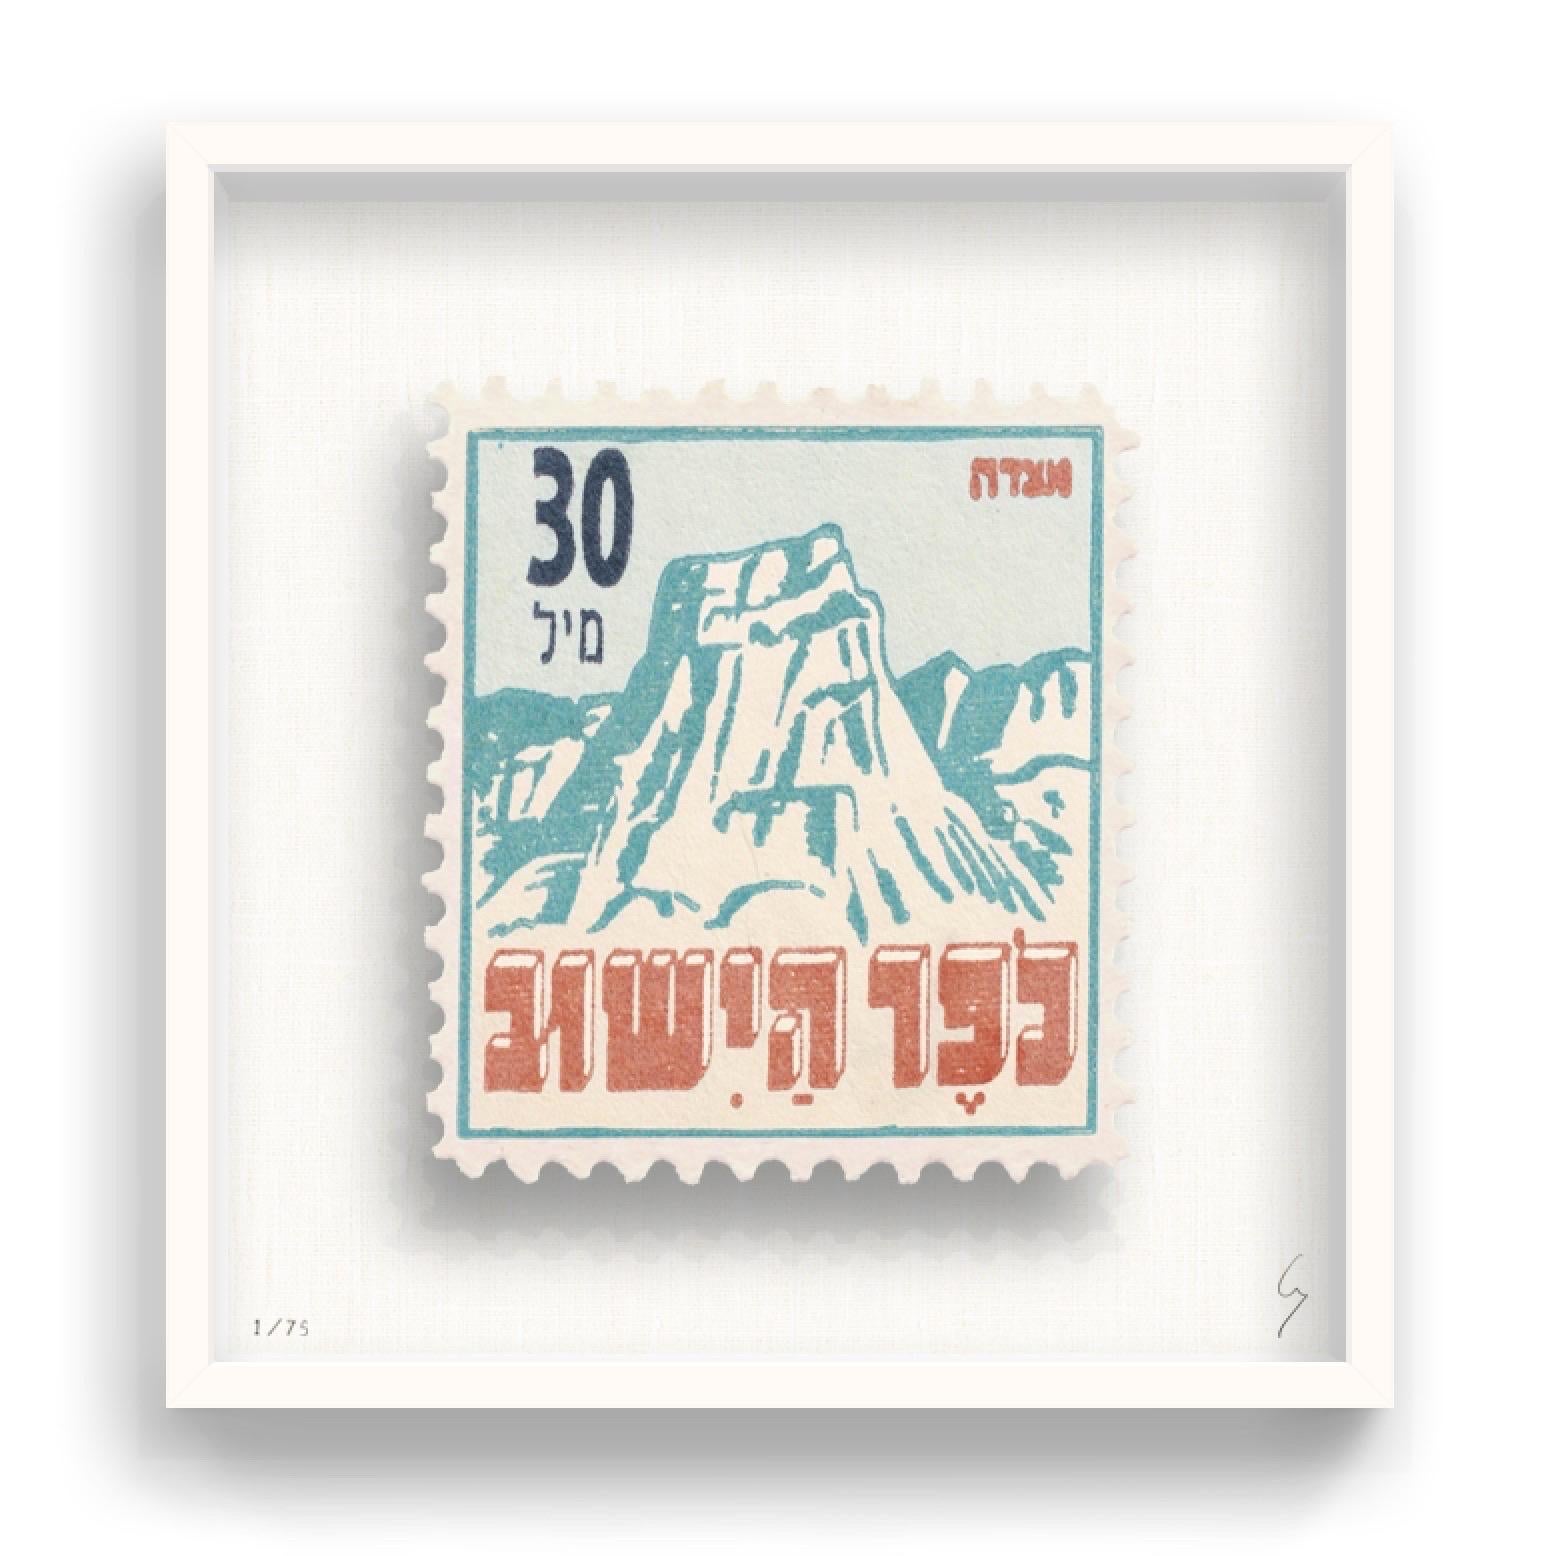 Guy Gee, Israel (medium)

Hand-engraved print on 350gsm on G.F Smith card
53 x 56cm (20 4/5 x 22 2/5 in)
Frame included 
Edition of 75 

Each artwork by Guy had been digitally reimagined from an original postage stamp. Cut out and finished by hand,